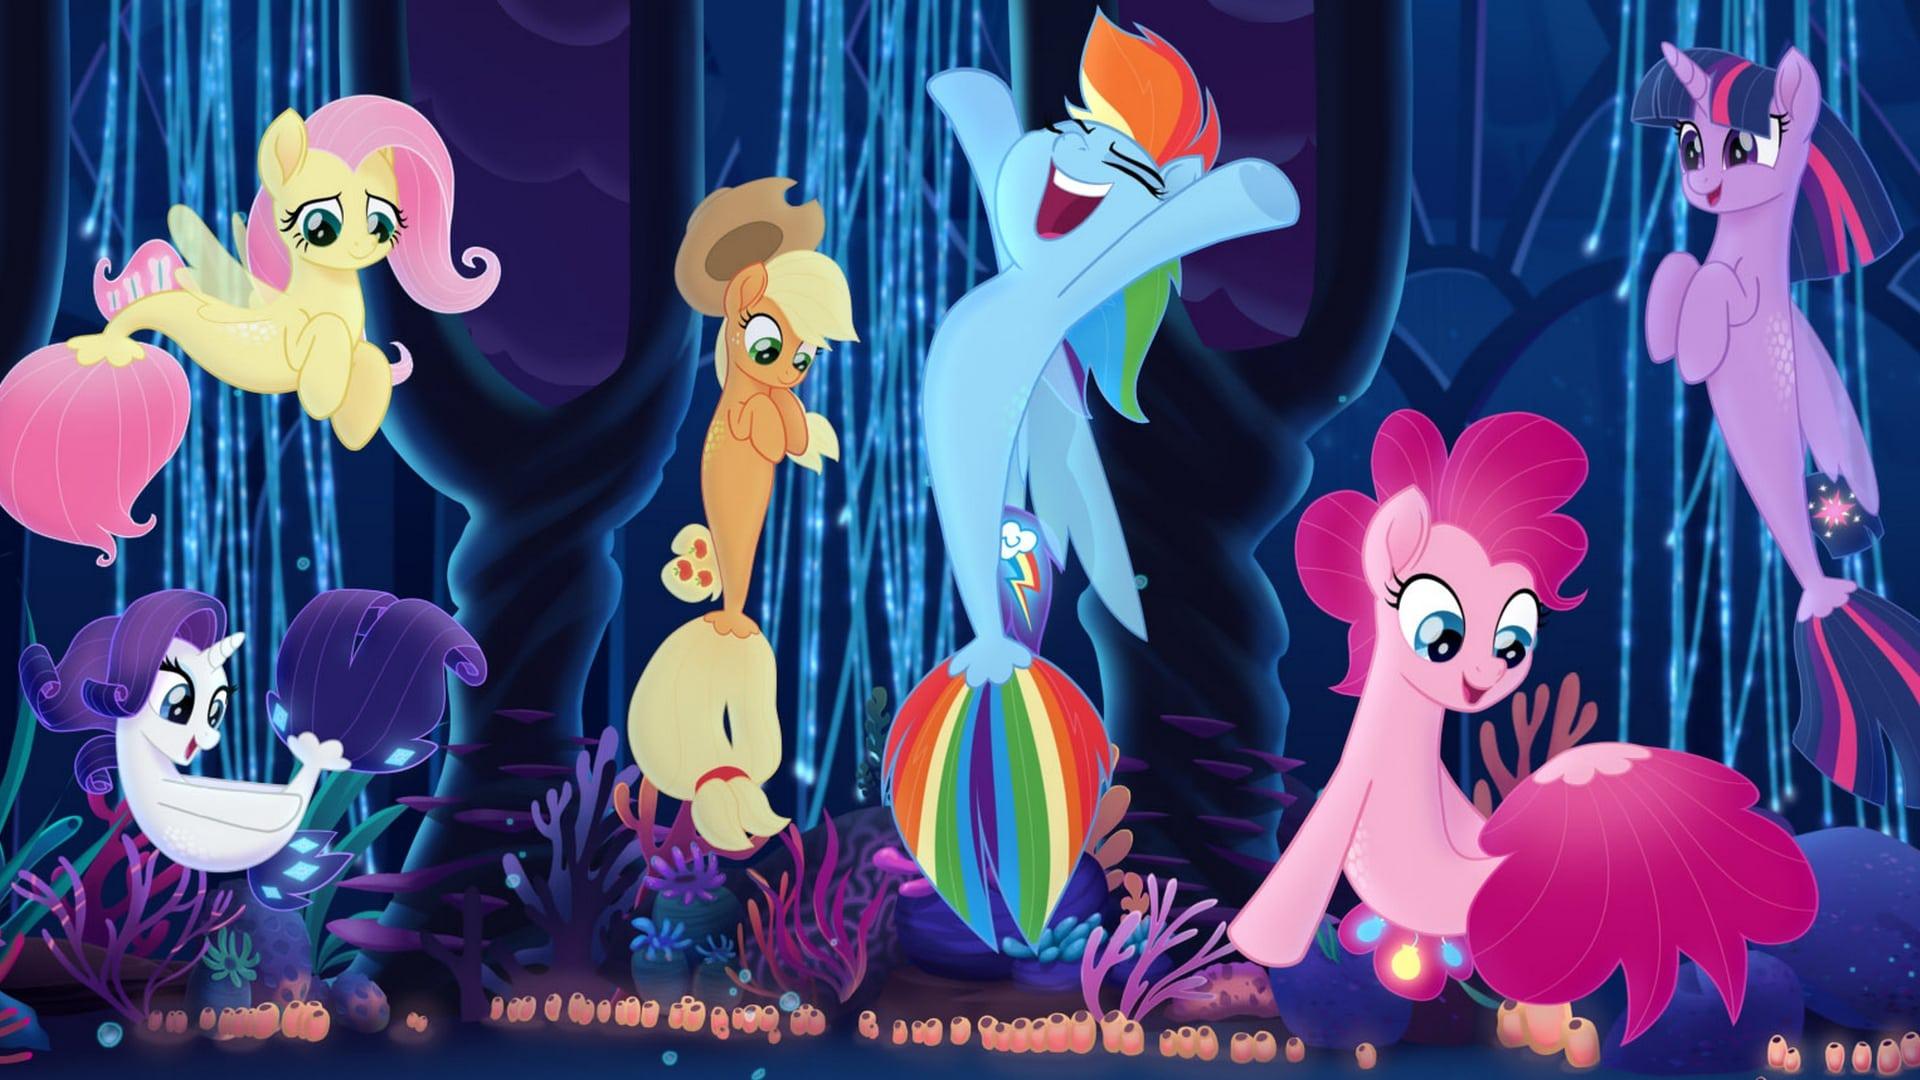 Backdrop Image for My Little Pony: The Movie